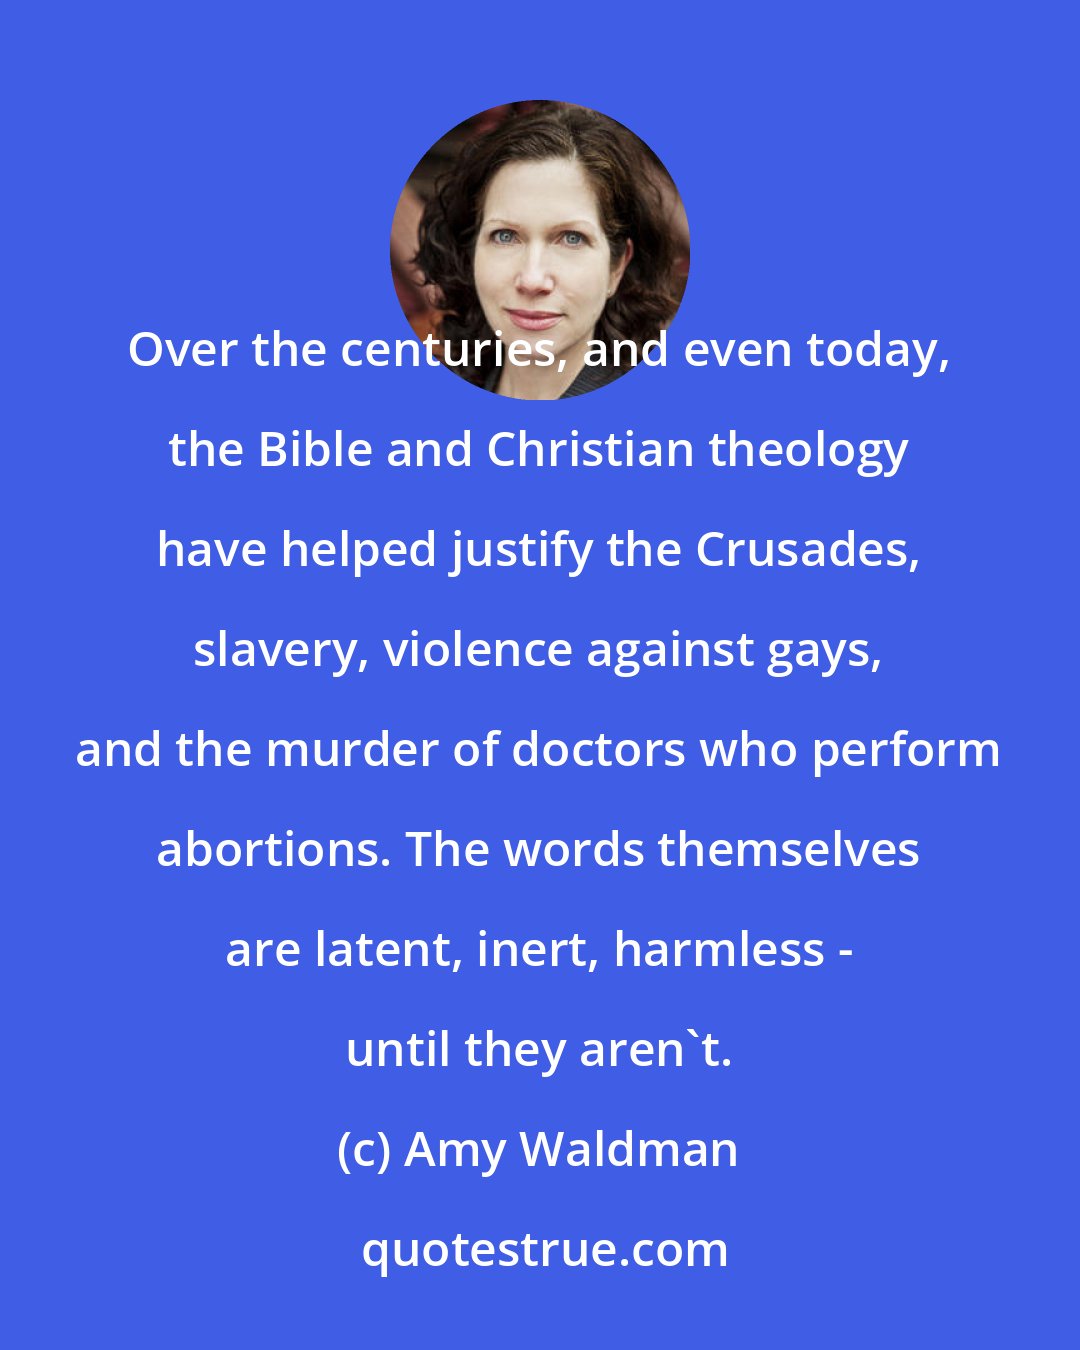 Amy Waldman: Over the centuries, and even today, the Bible and Christian theology have helped justify the Crusades, slavery, violence against gays, and the murder of doctors who perform abortions. The words themselves are latent, inert, harmless - until they aren't.